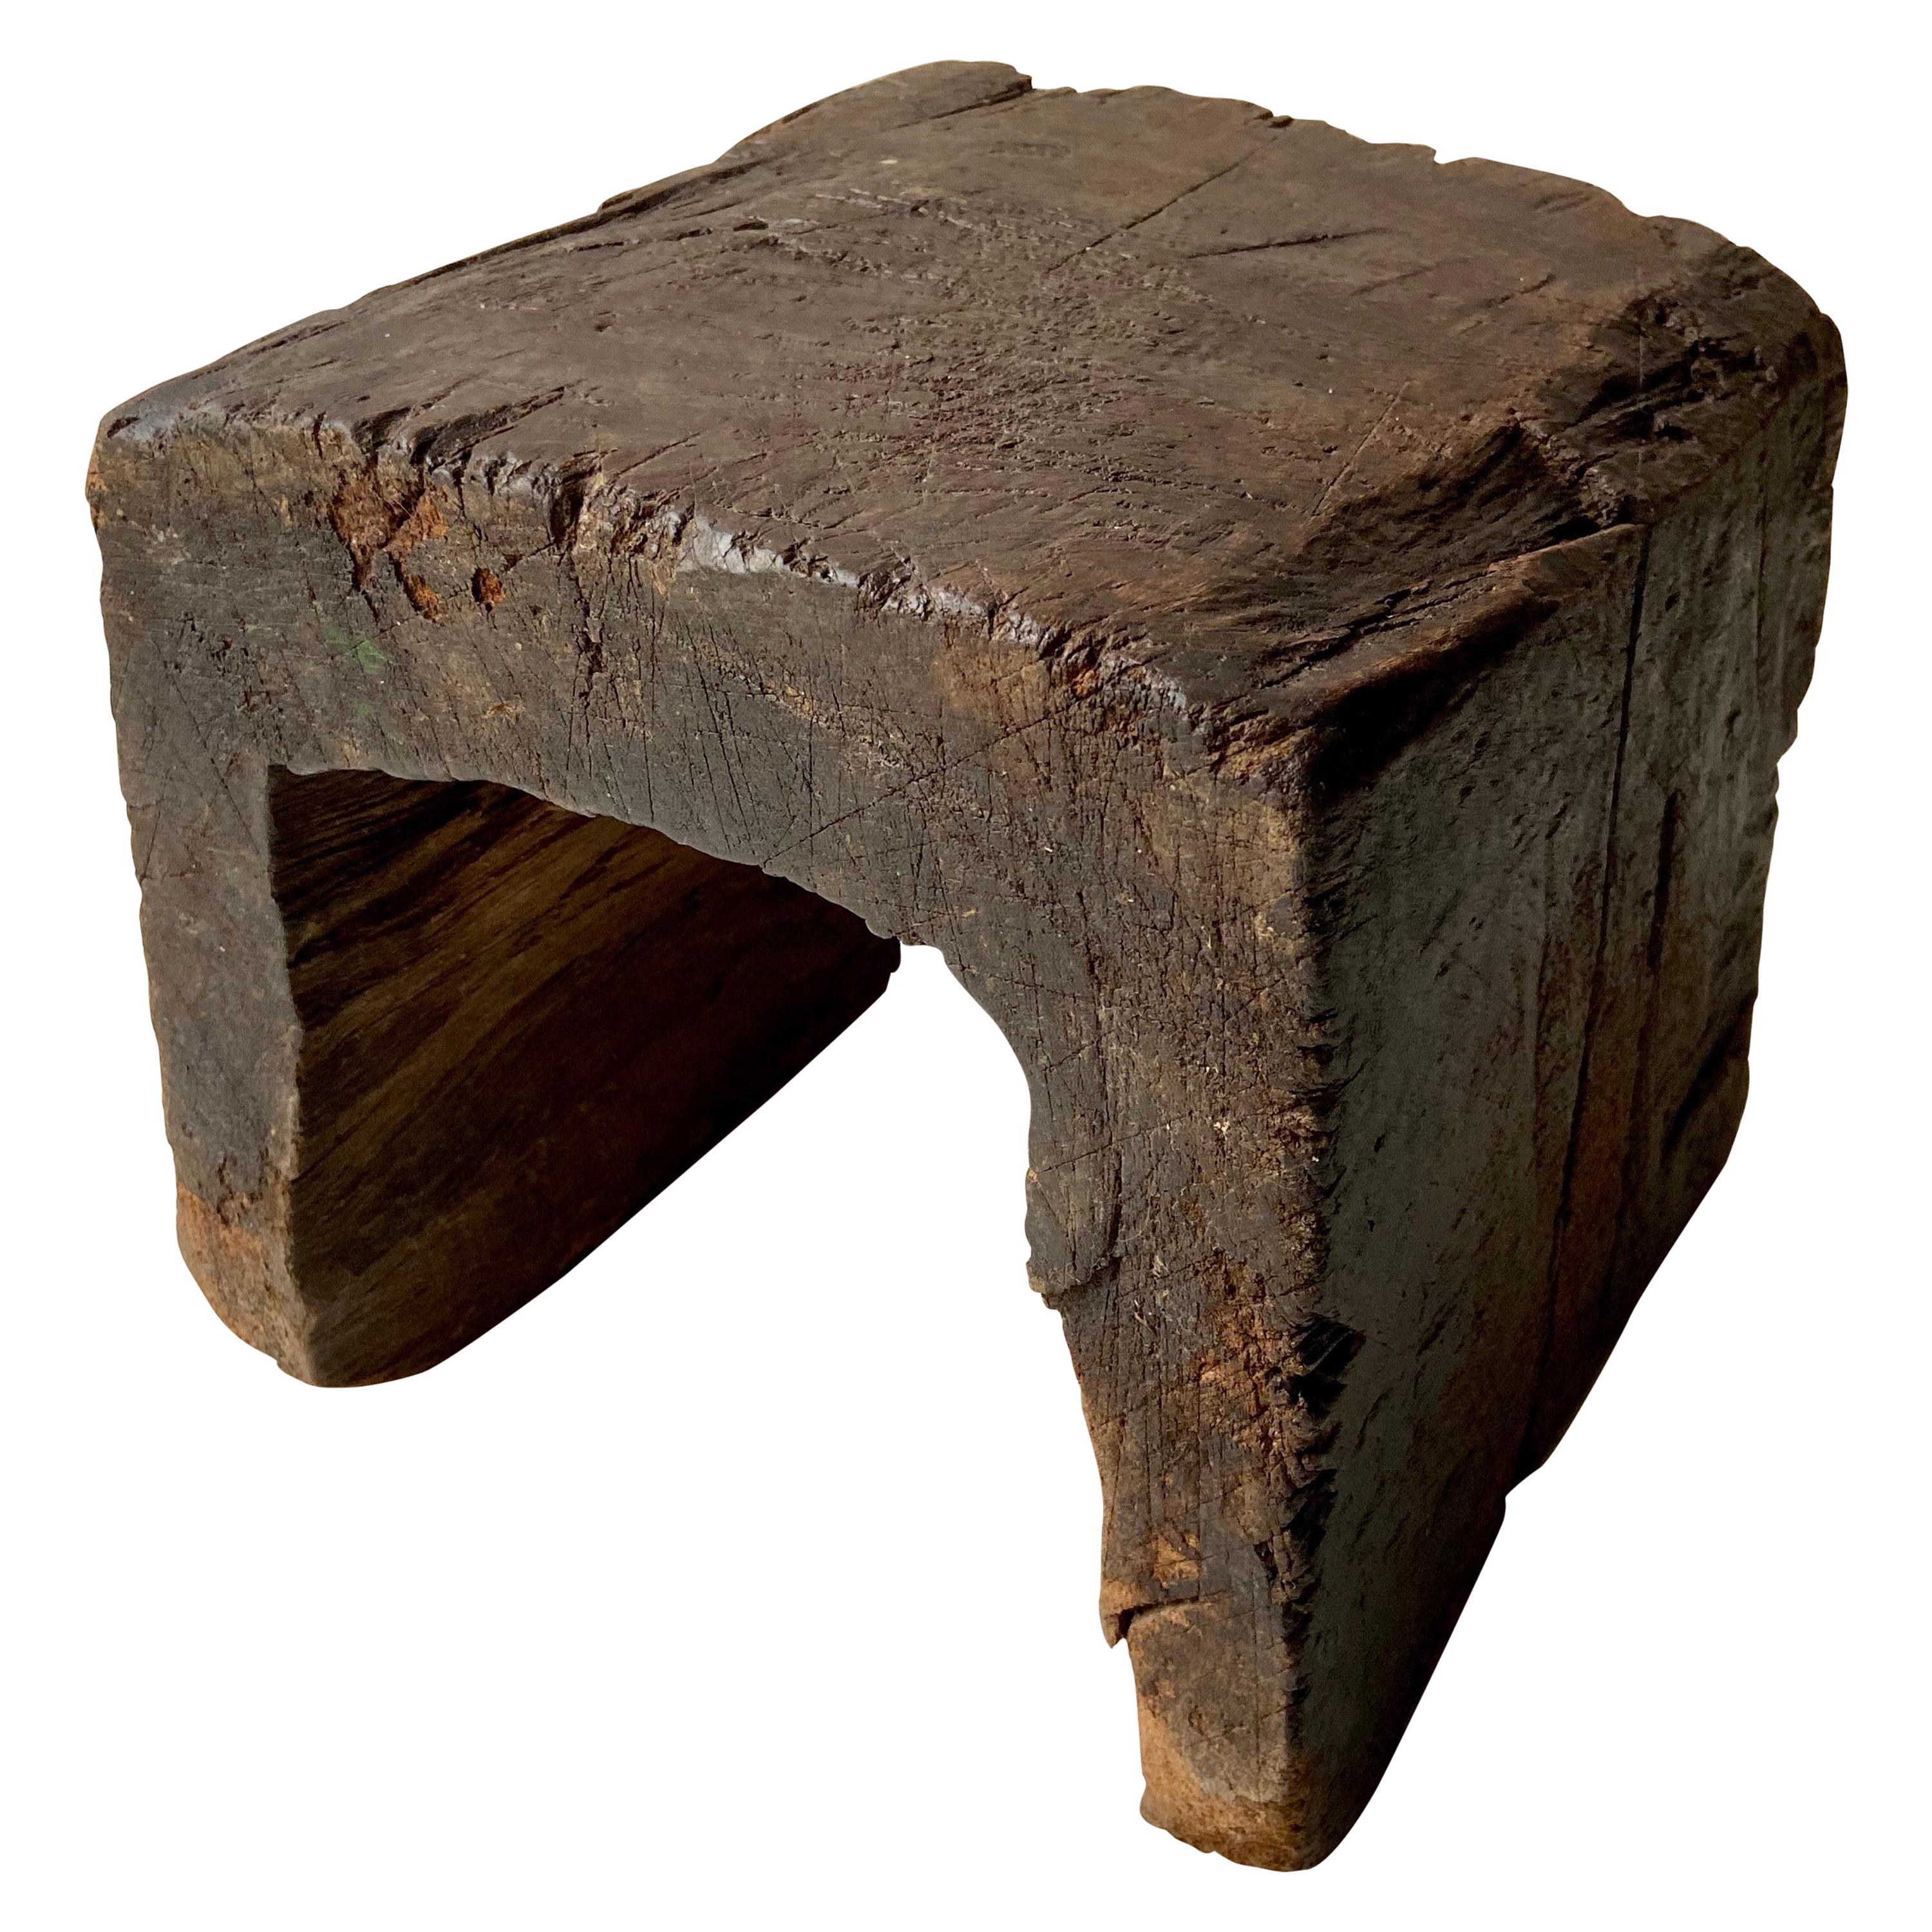 Primitive Styled Hardwood Dining Stool from Mexico, circa 1920s